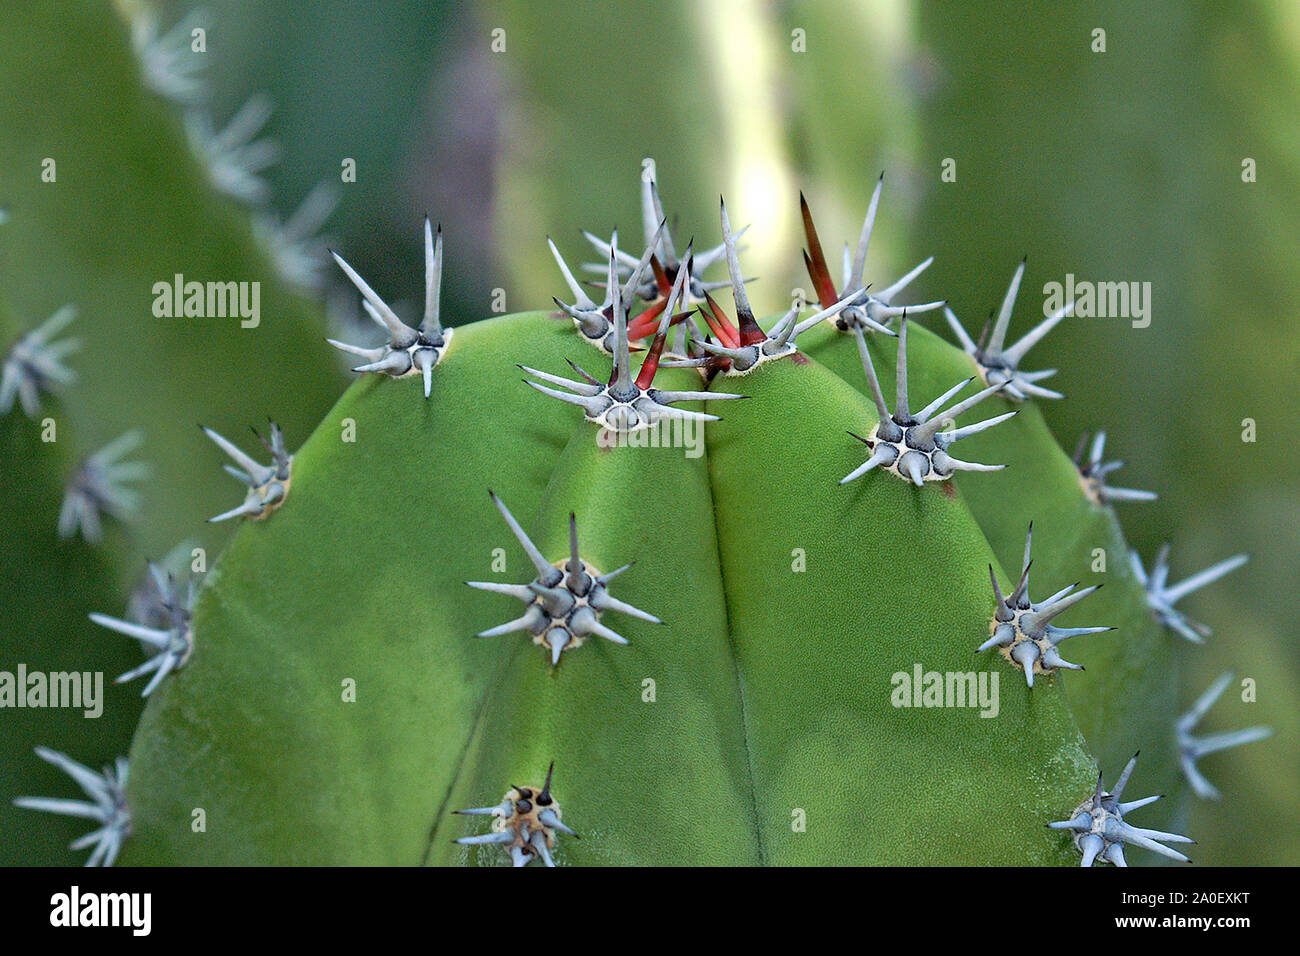 Closeup of cactus plant with detail of beautiful, sharp spines. Background cactus with sharp thorns. Stock Photo